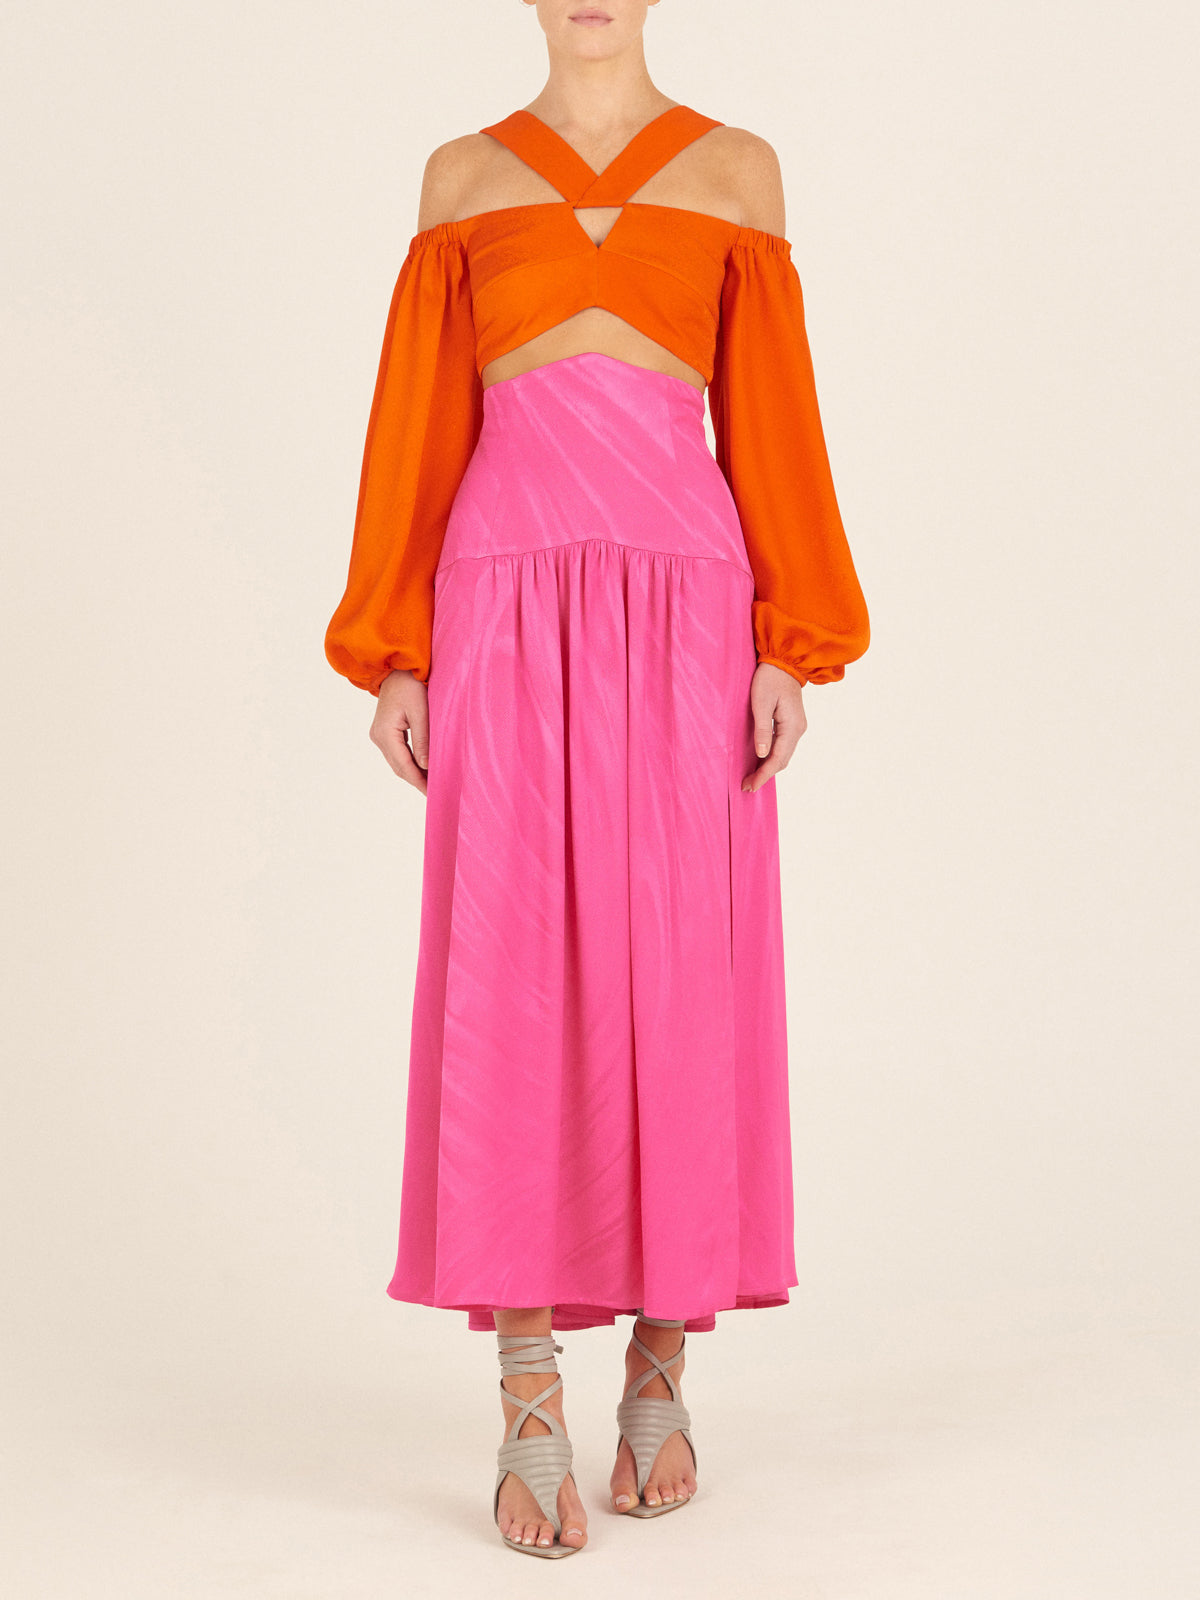 Bright pink sleeveless dress with a high neckline and a full-length, Callie Skirt Fuchsia, displayed on a white background.